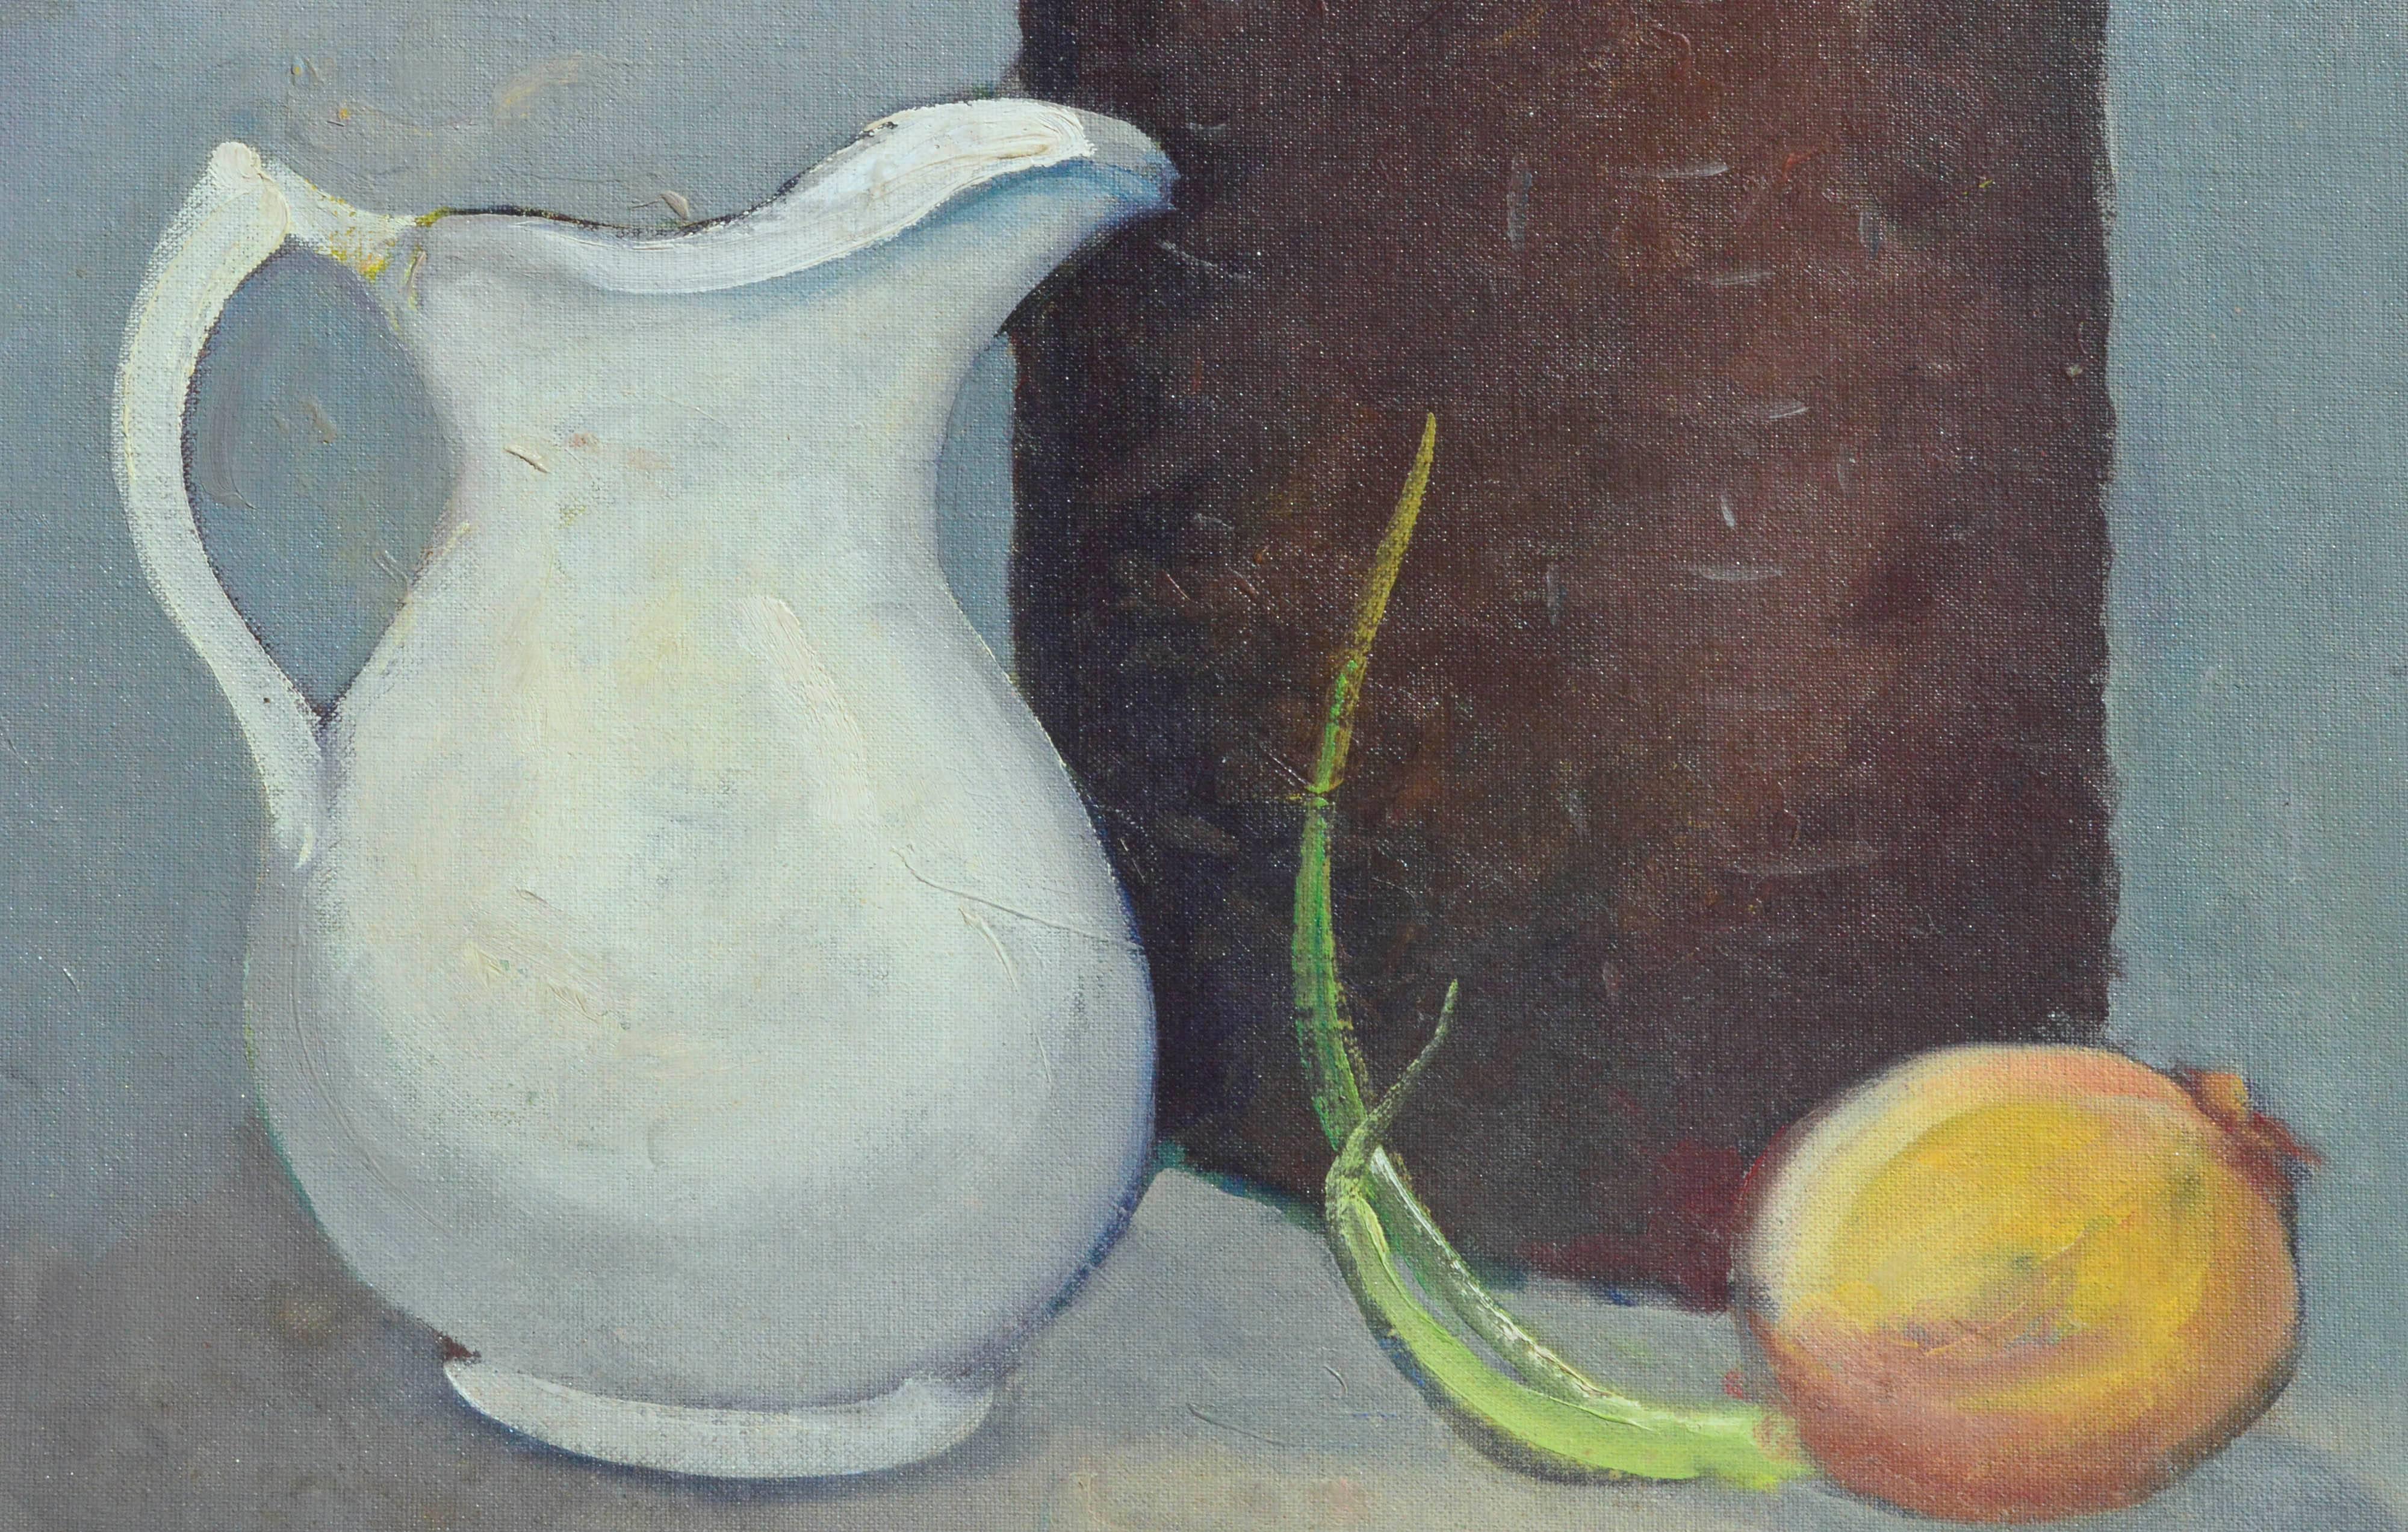 Mid Century White Pitcher, Brown Jug and Onion Still Life - Painting by Jon Blanchette